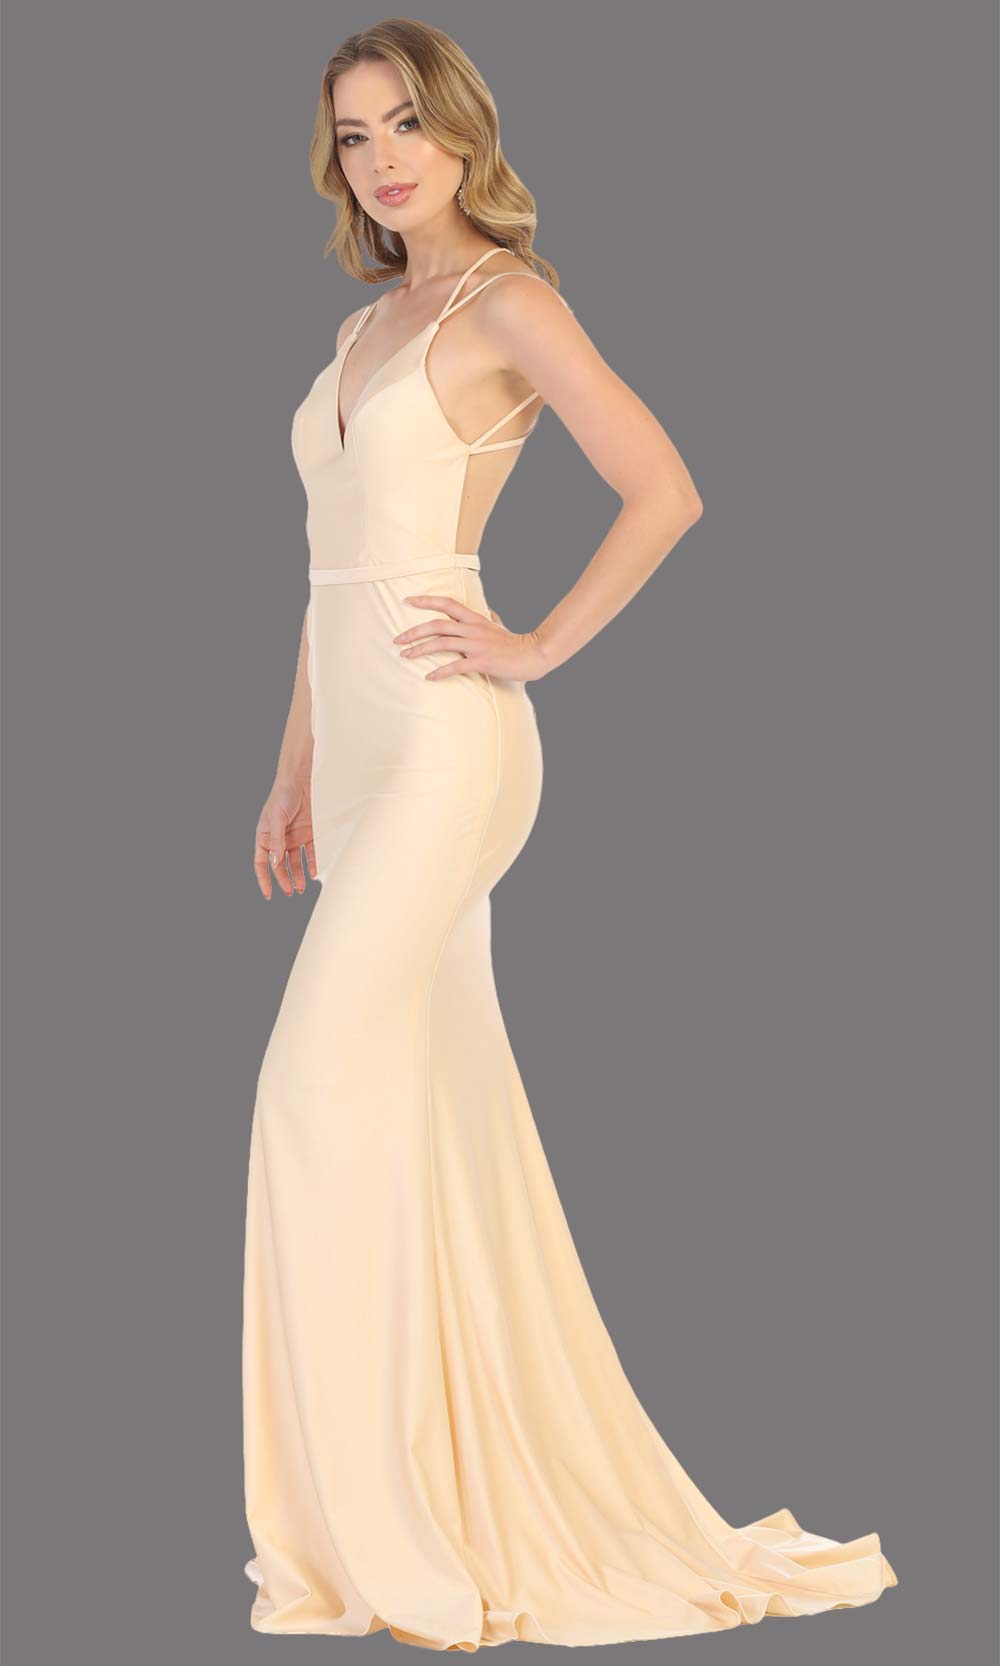 Mayqueen MQ1720 long champagne sleek & sexy evening dress w/low v neck & open back dress. This tight fitted dress is perfect for prom, sleek & sexy wedding guest dress, gala, engagement/e-shoot dress, bridesmaid dresses, formal evening party dress